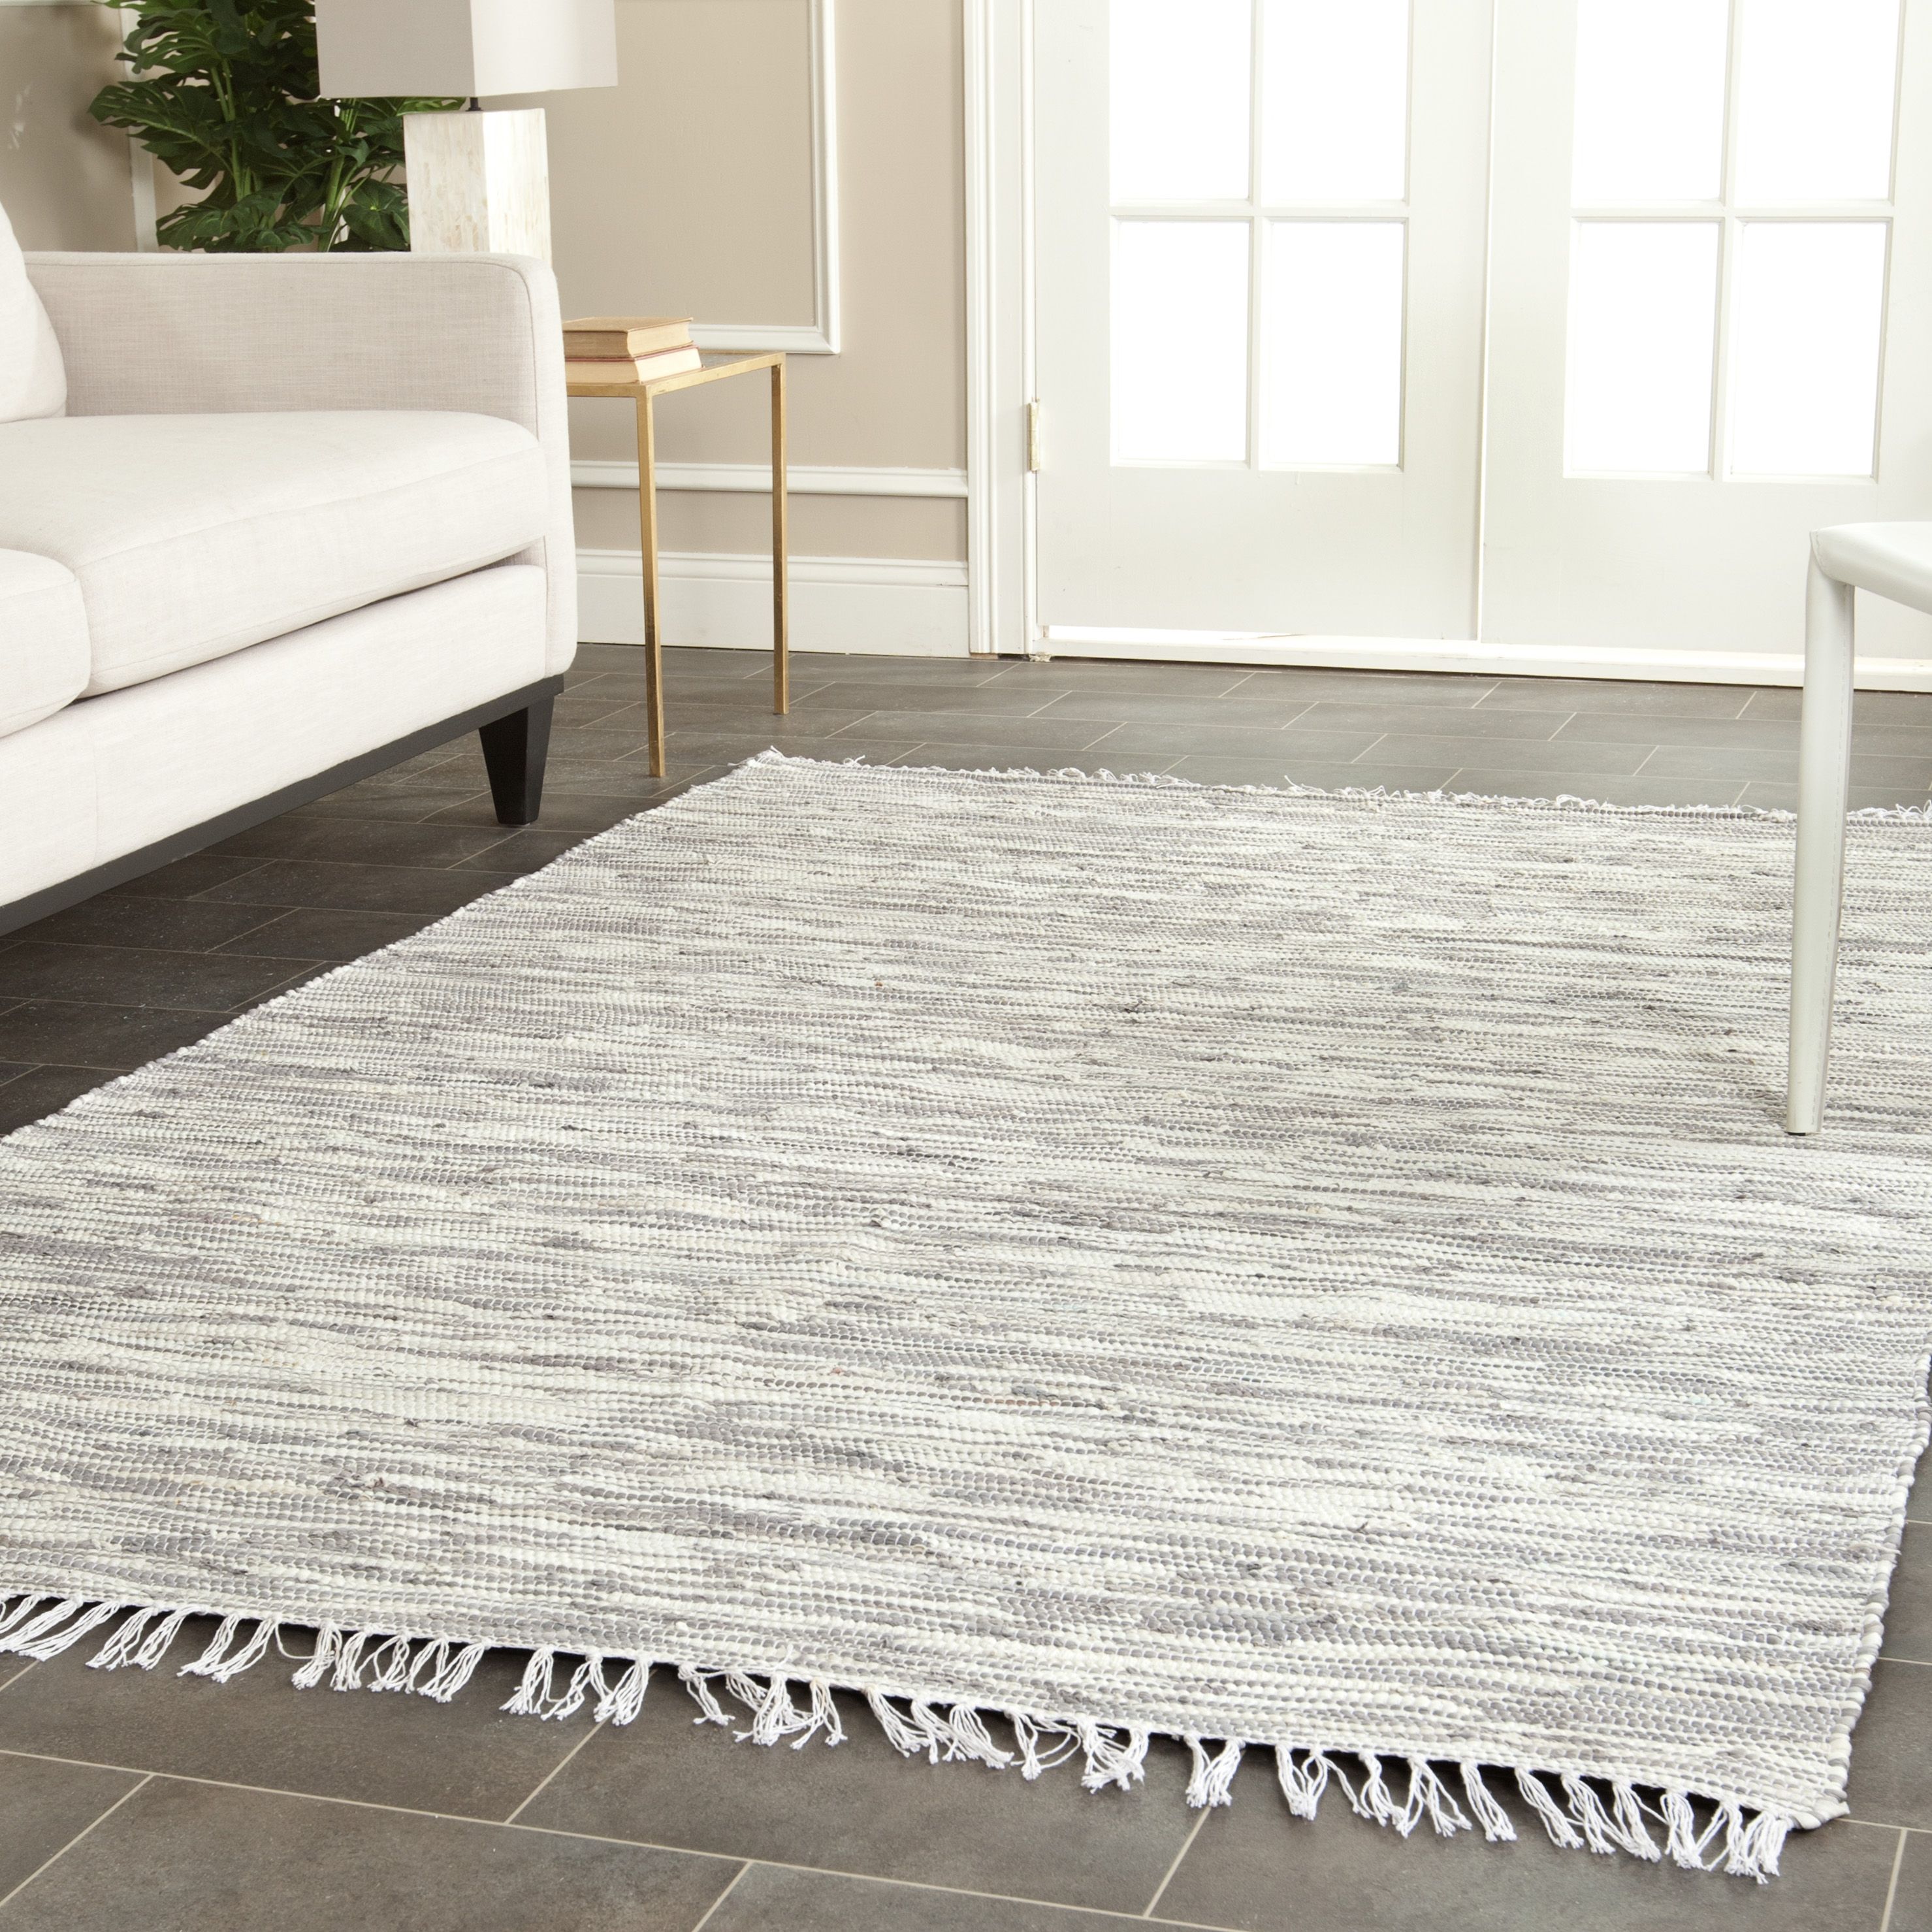 Featured Photo of Top 15 of Wool Flat Weave Area Rugs